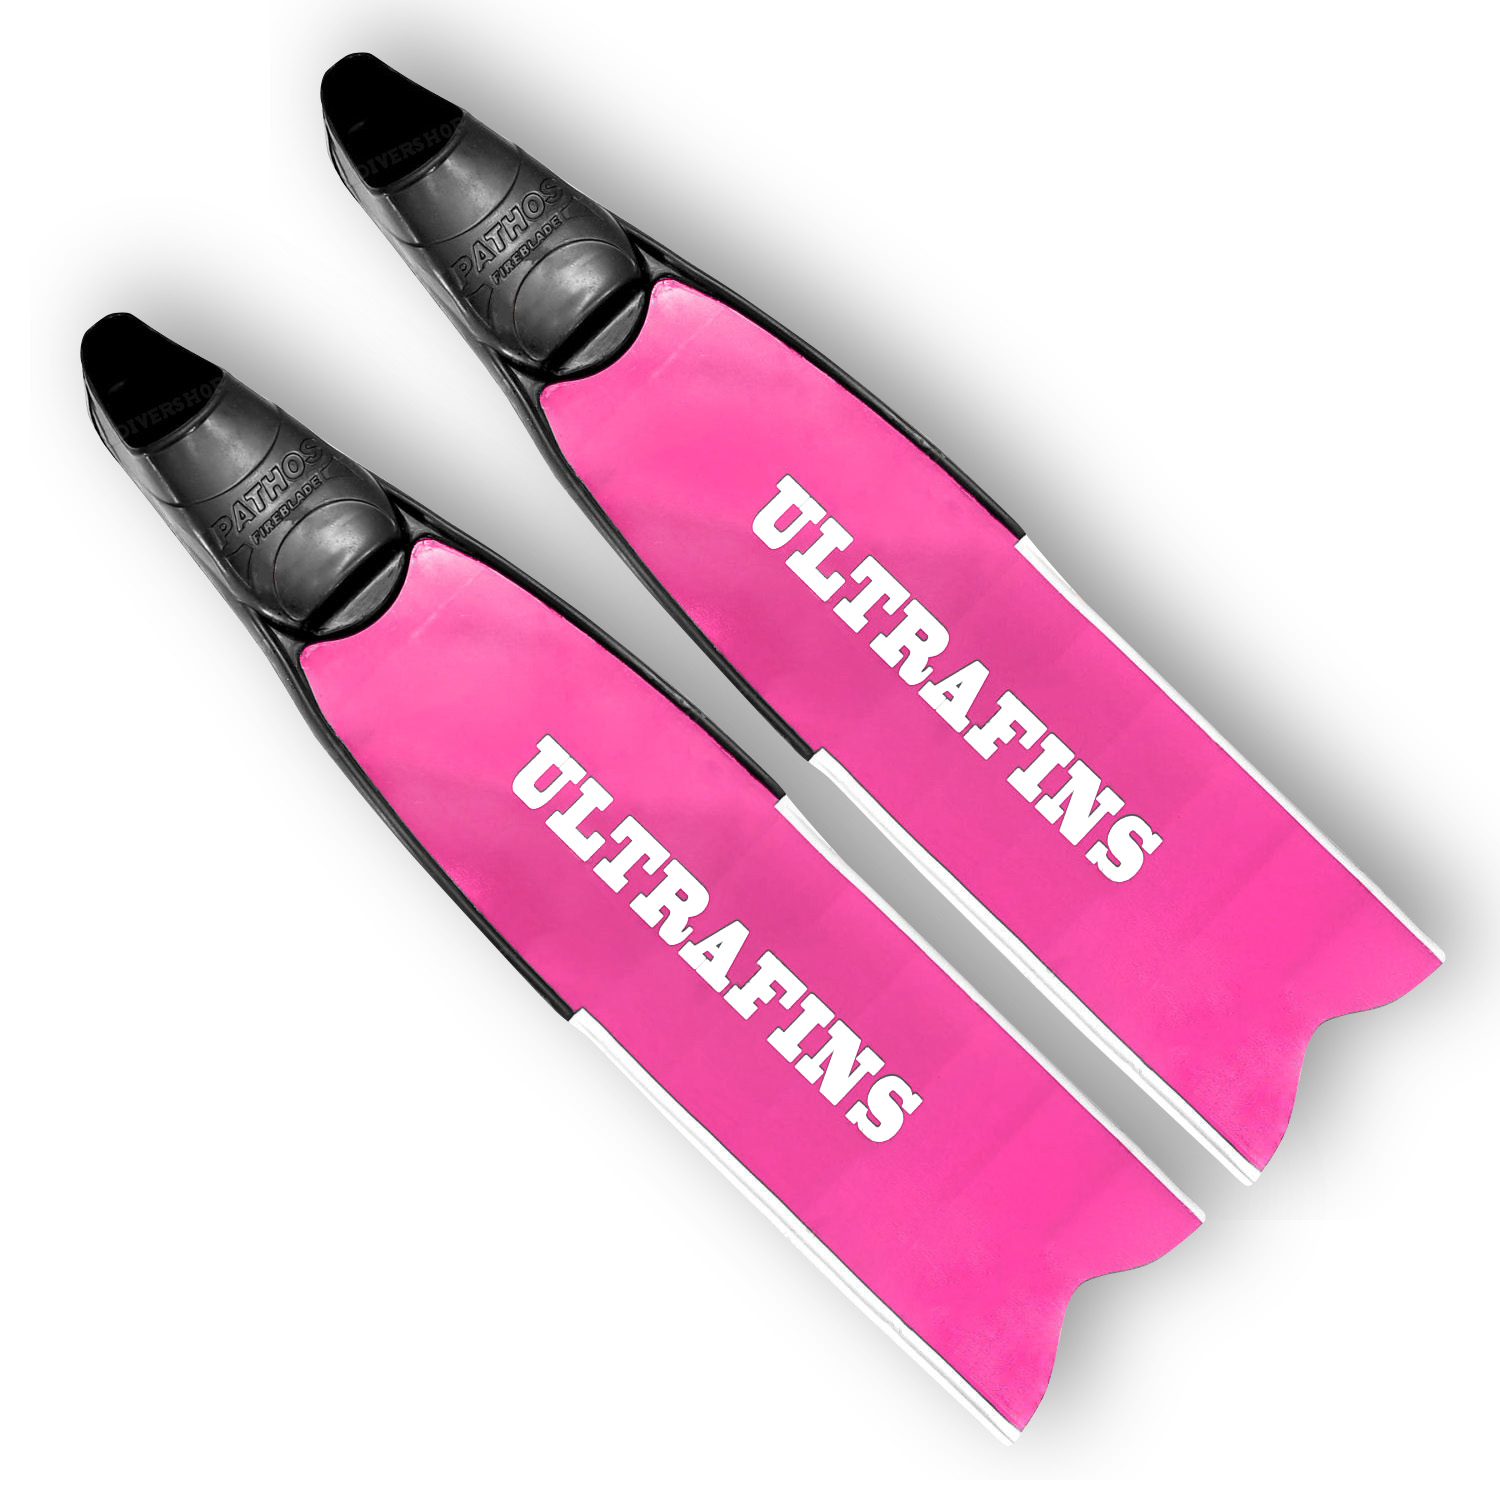 UltraFins Pink with Pathos pockets